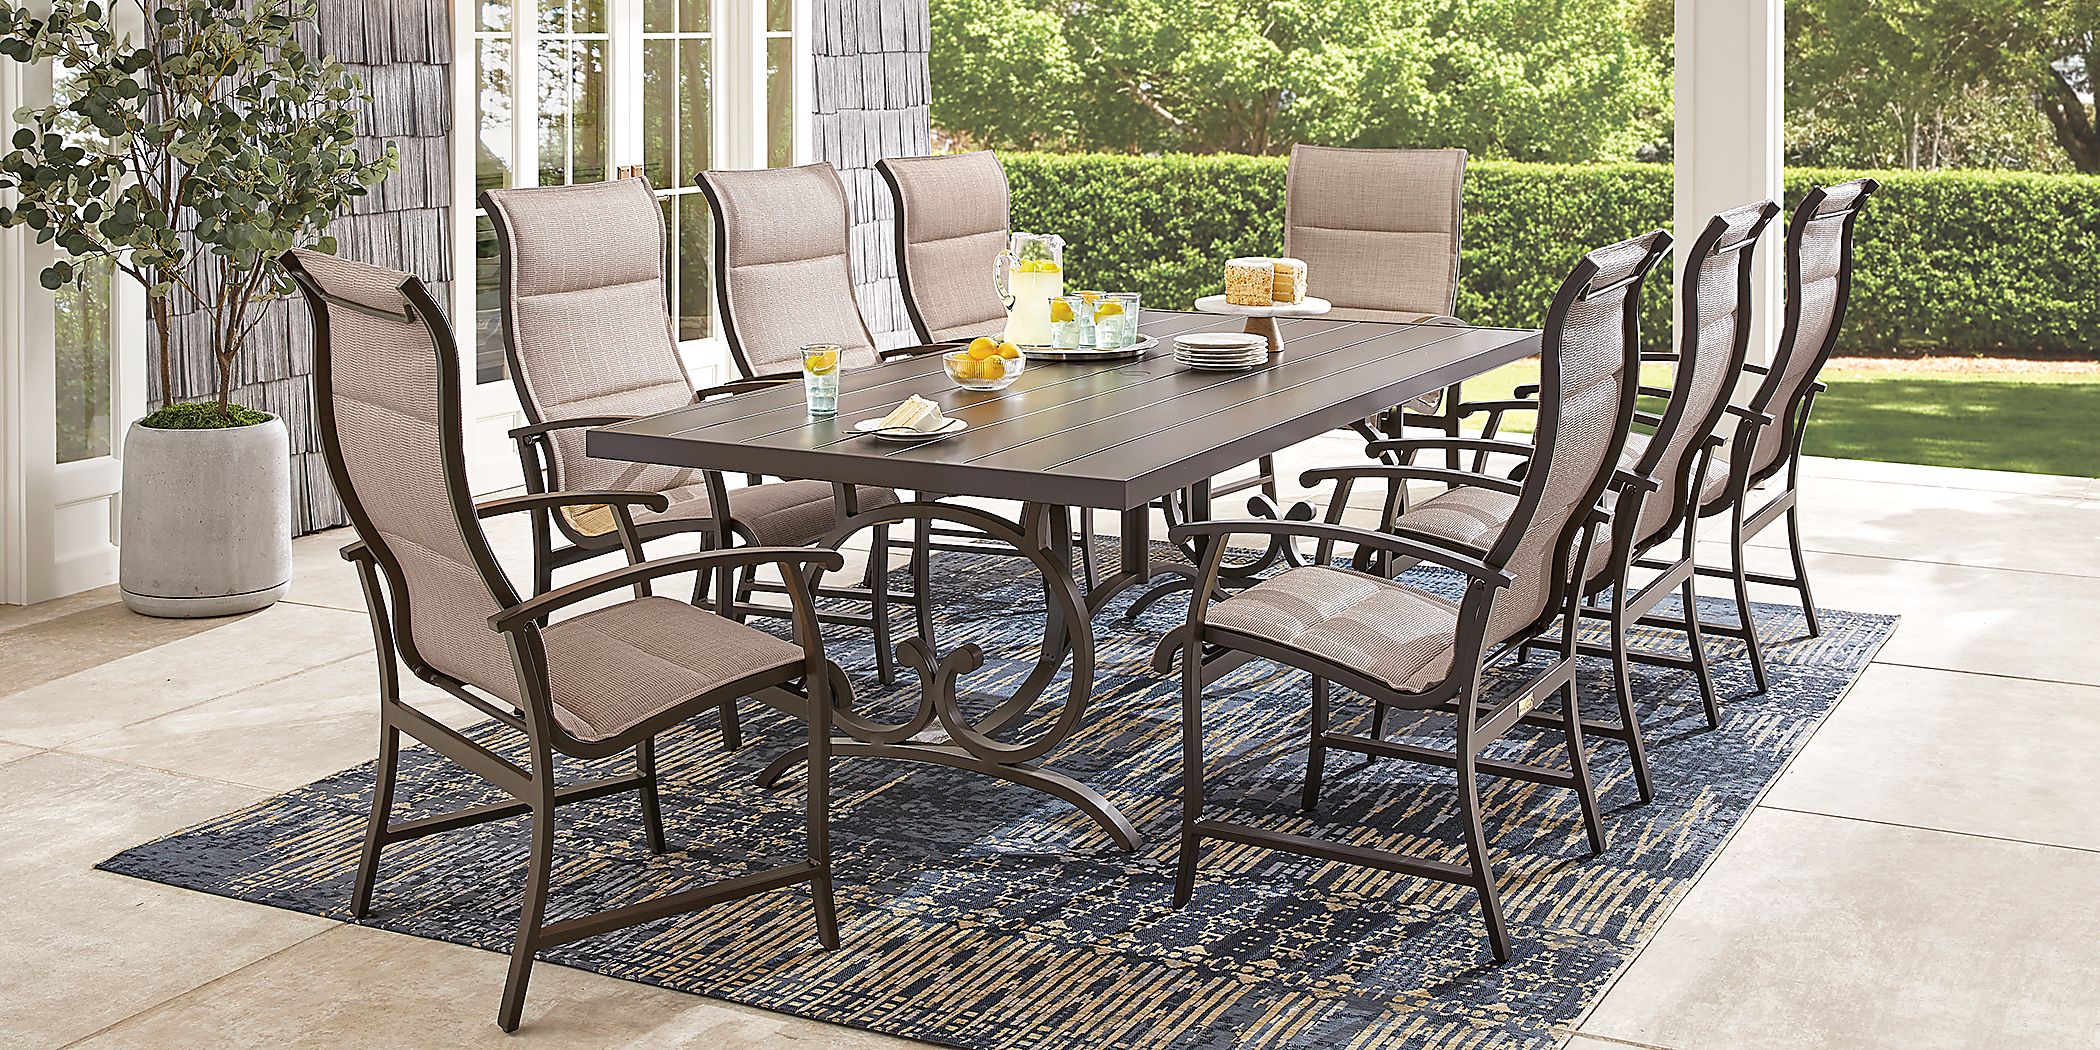 Bermuda Breeze Aged Bronze 9 Pc Outdoor 90 in. Rectangle Dining Set with Sling Chairs